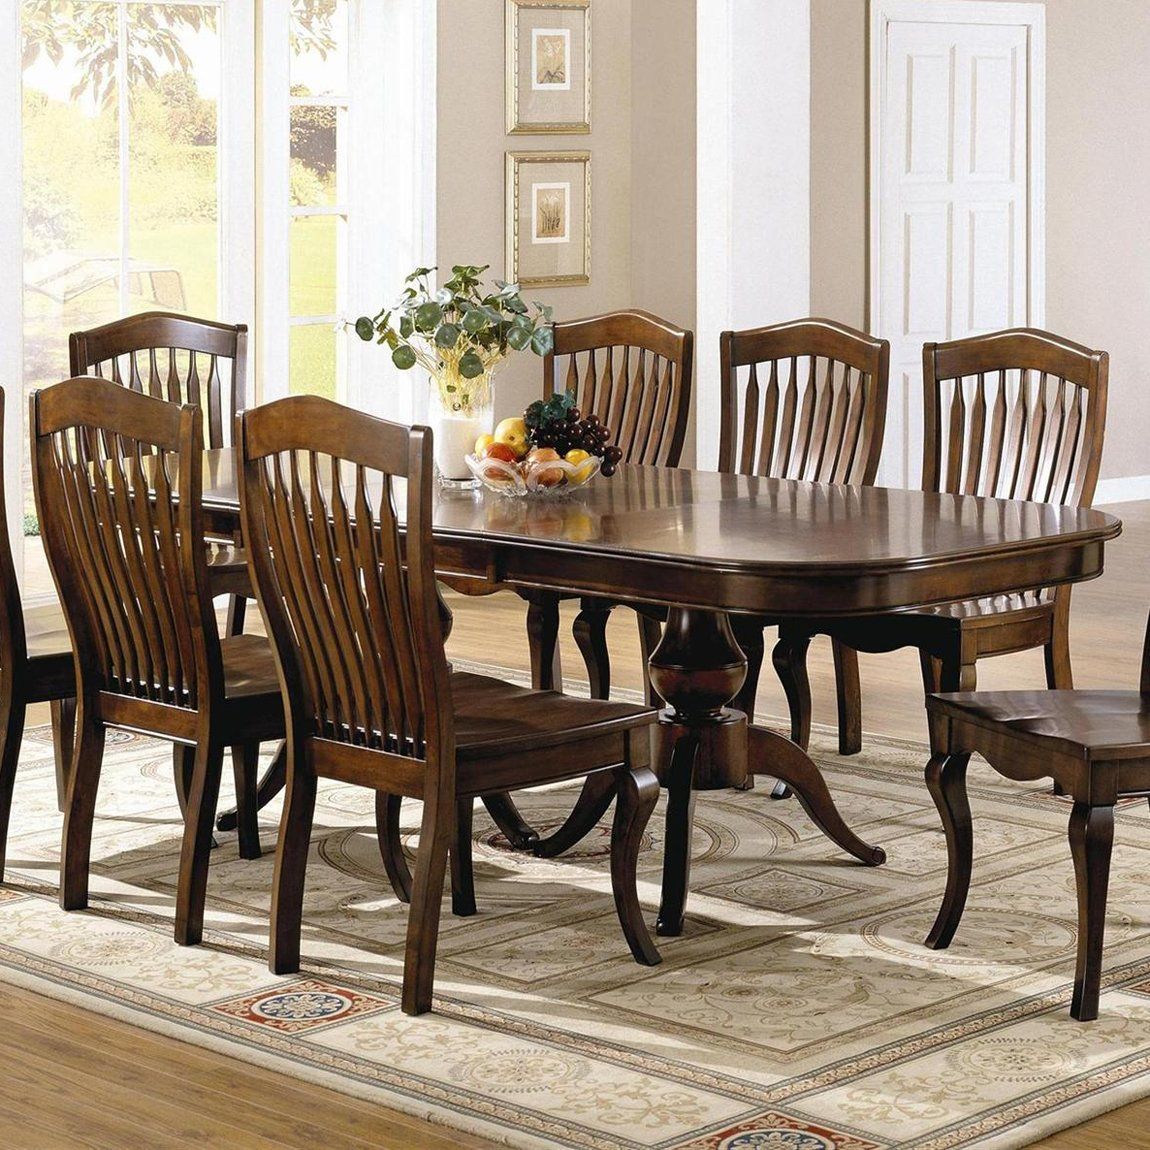 Brooks Furniture Classic Heirlooms Double Pedestal Dining Within Most Recently Released Brooks Dining Tables (View 9 of 25)